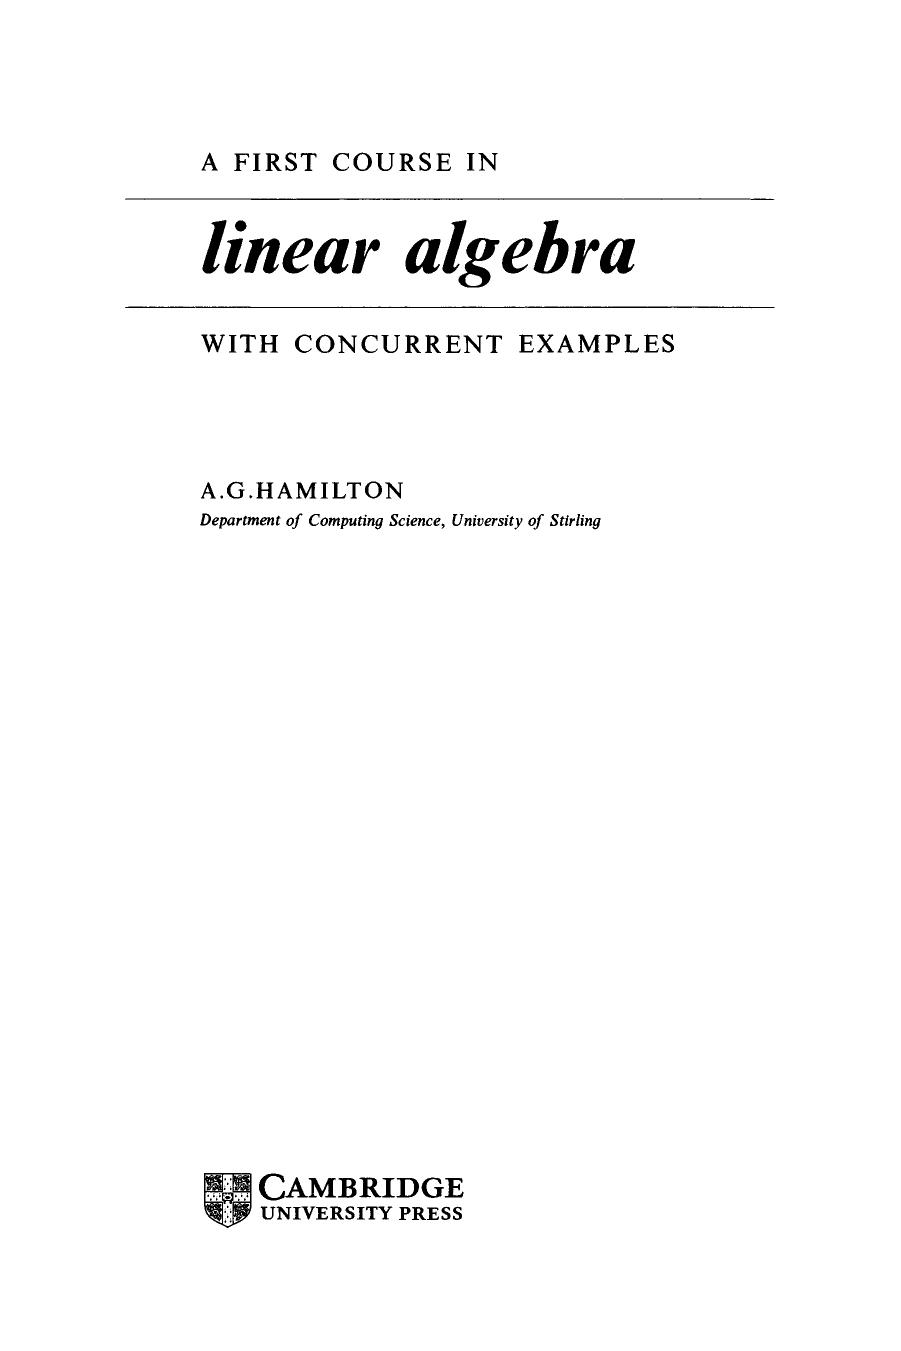 A First Course in Linear Algebra: with Concurrent Examples